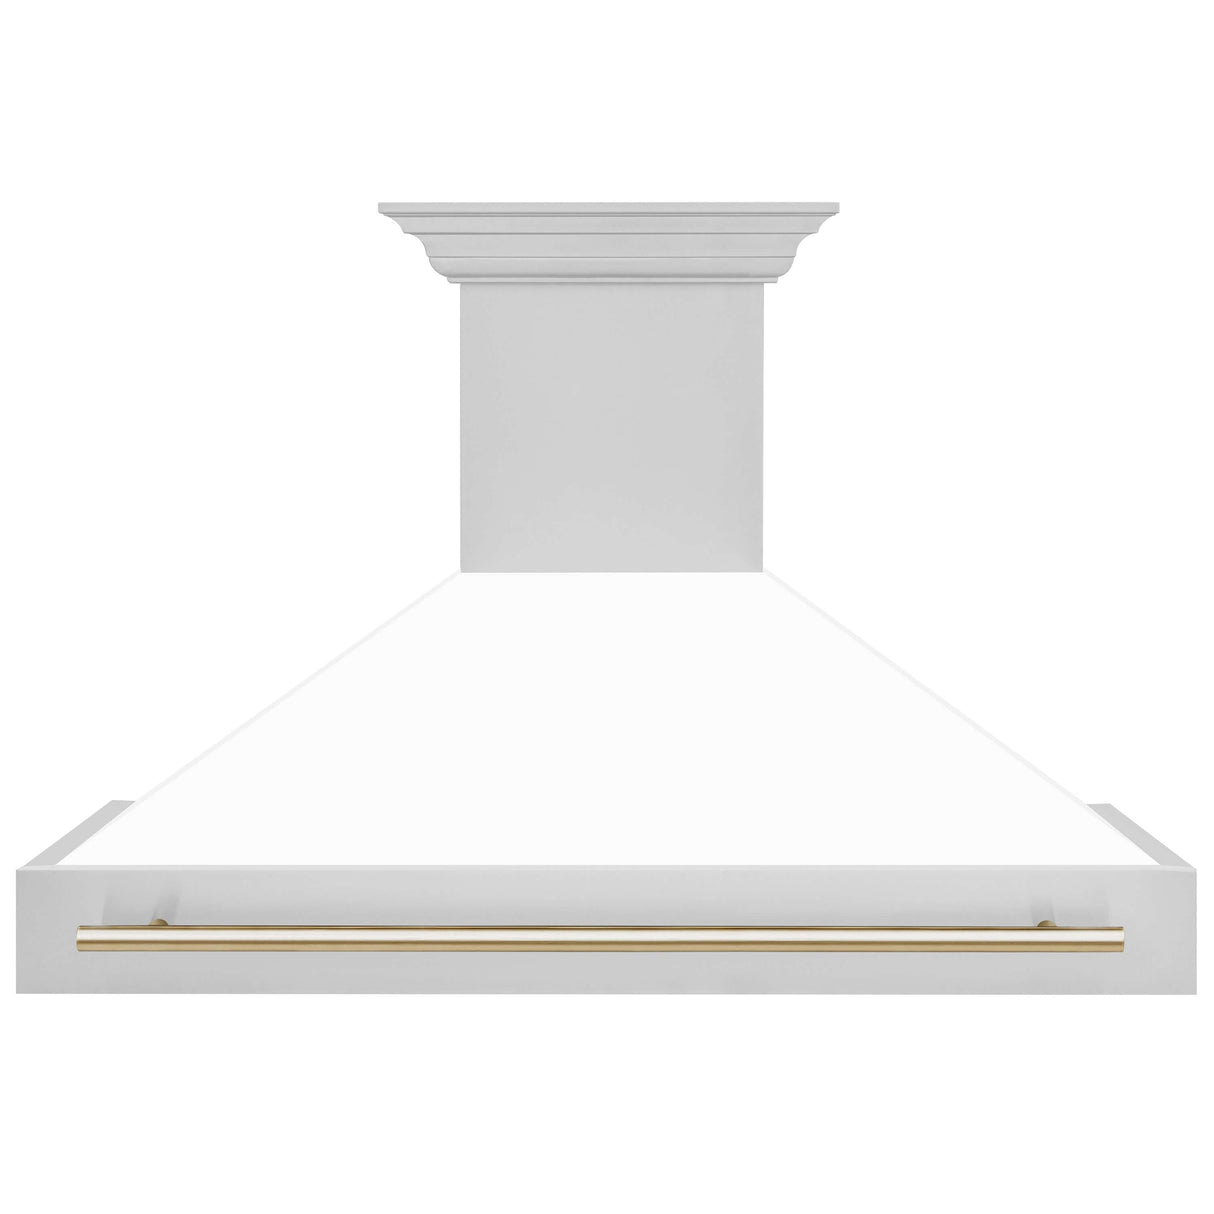 ZLINE Autograph Edition 48 in. Stainless Steel Range Hood with White Matte Shell and Handle (8654STZ-WM48)